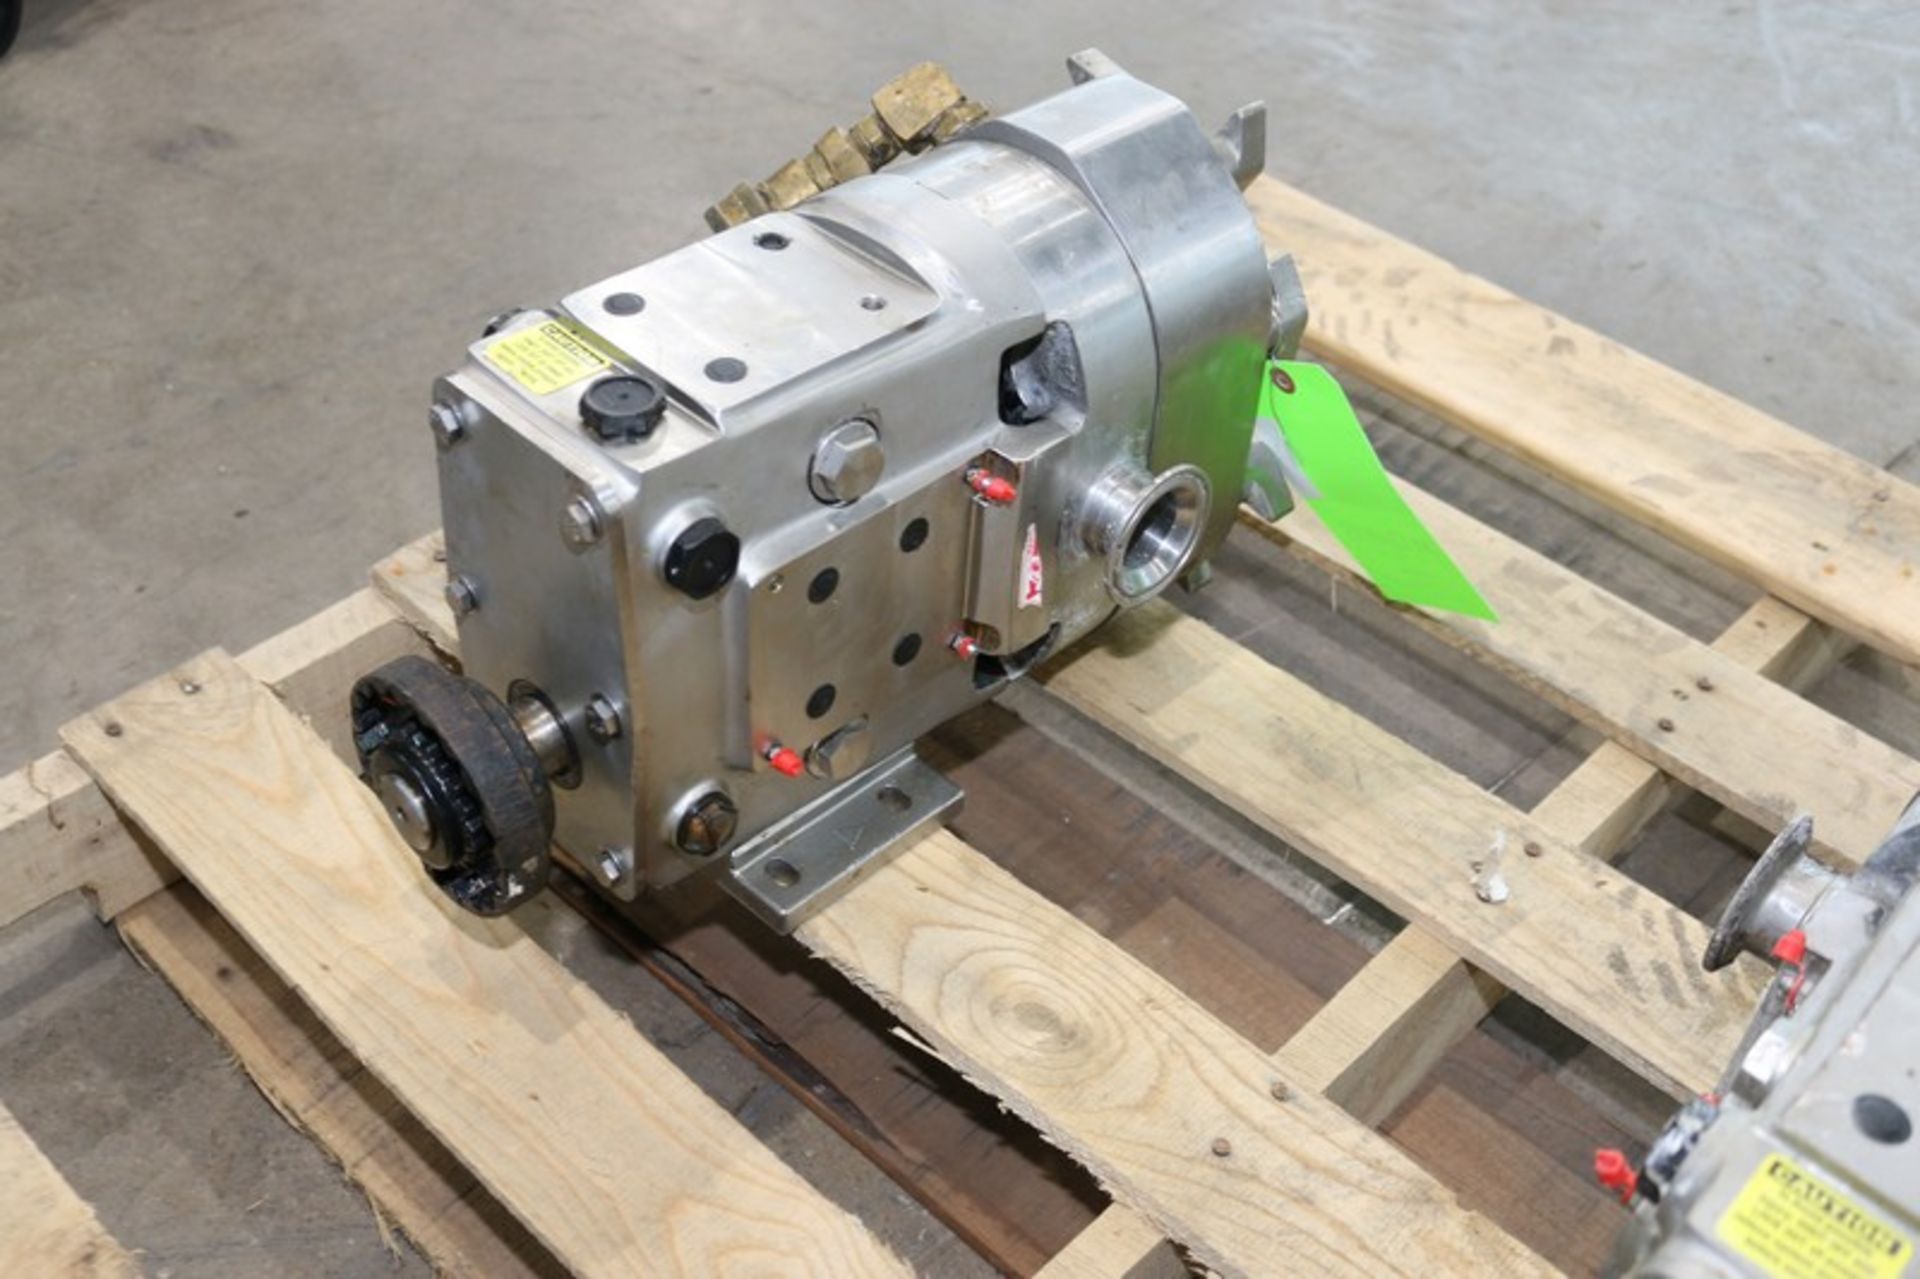 Ampco S/S Positive Displacement Pump Head, M/N ZP1+030-SO, S/N 1934541-5-1, with Aprox. 2" Clamp - Image 4 of 5